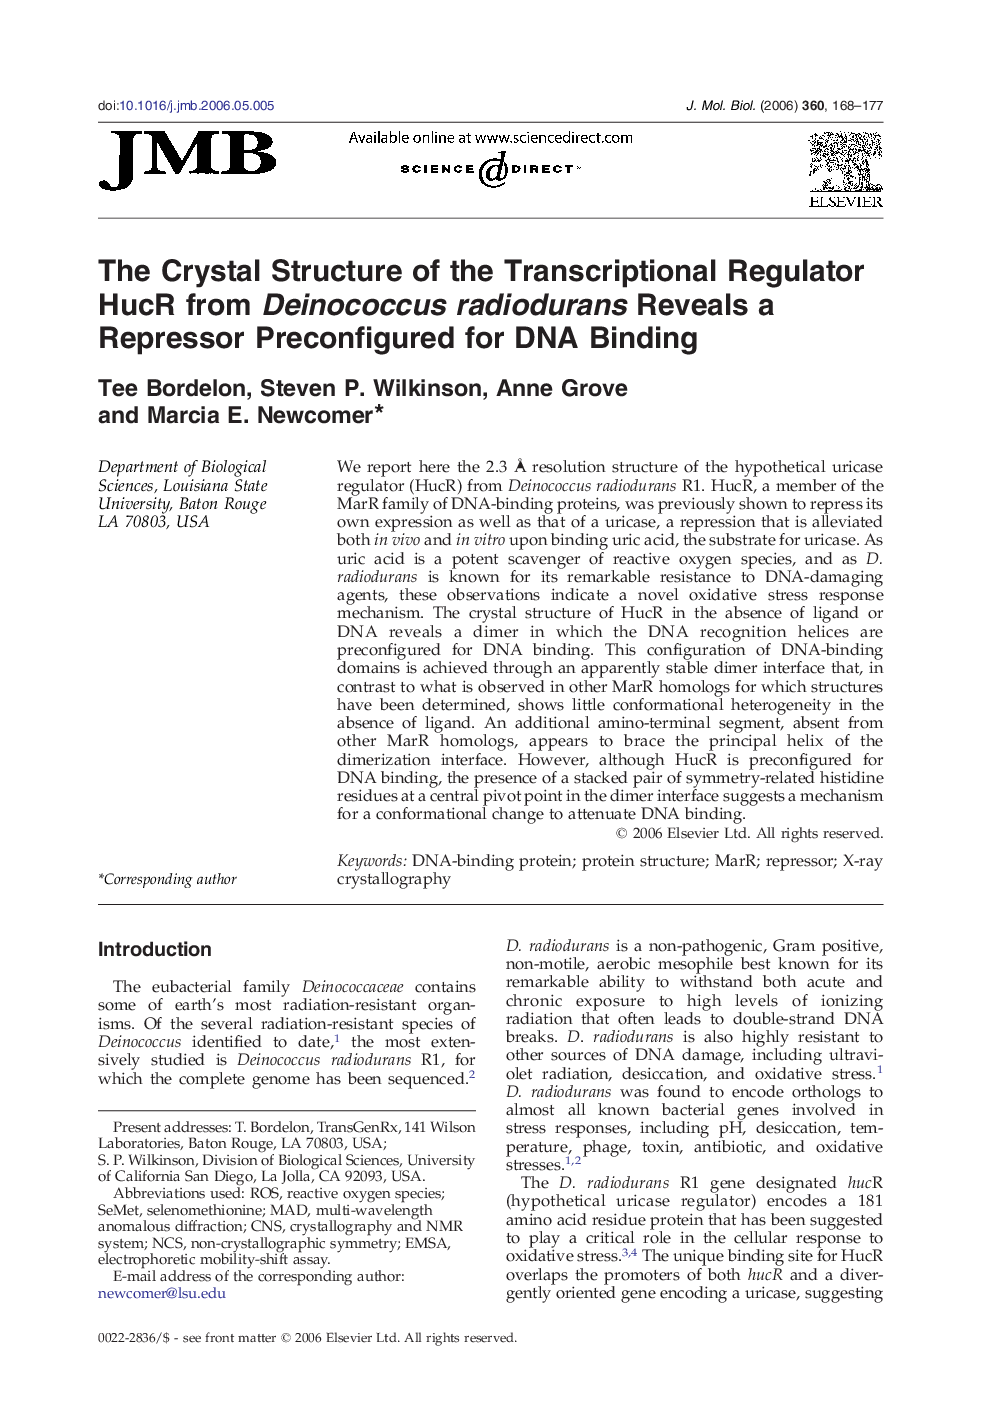 The Crystal Structure of the Transcriptional Regulator HucR from Deinococcus radiodurans Reveals a Repressor Preconfigured for DNA Binding